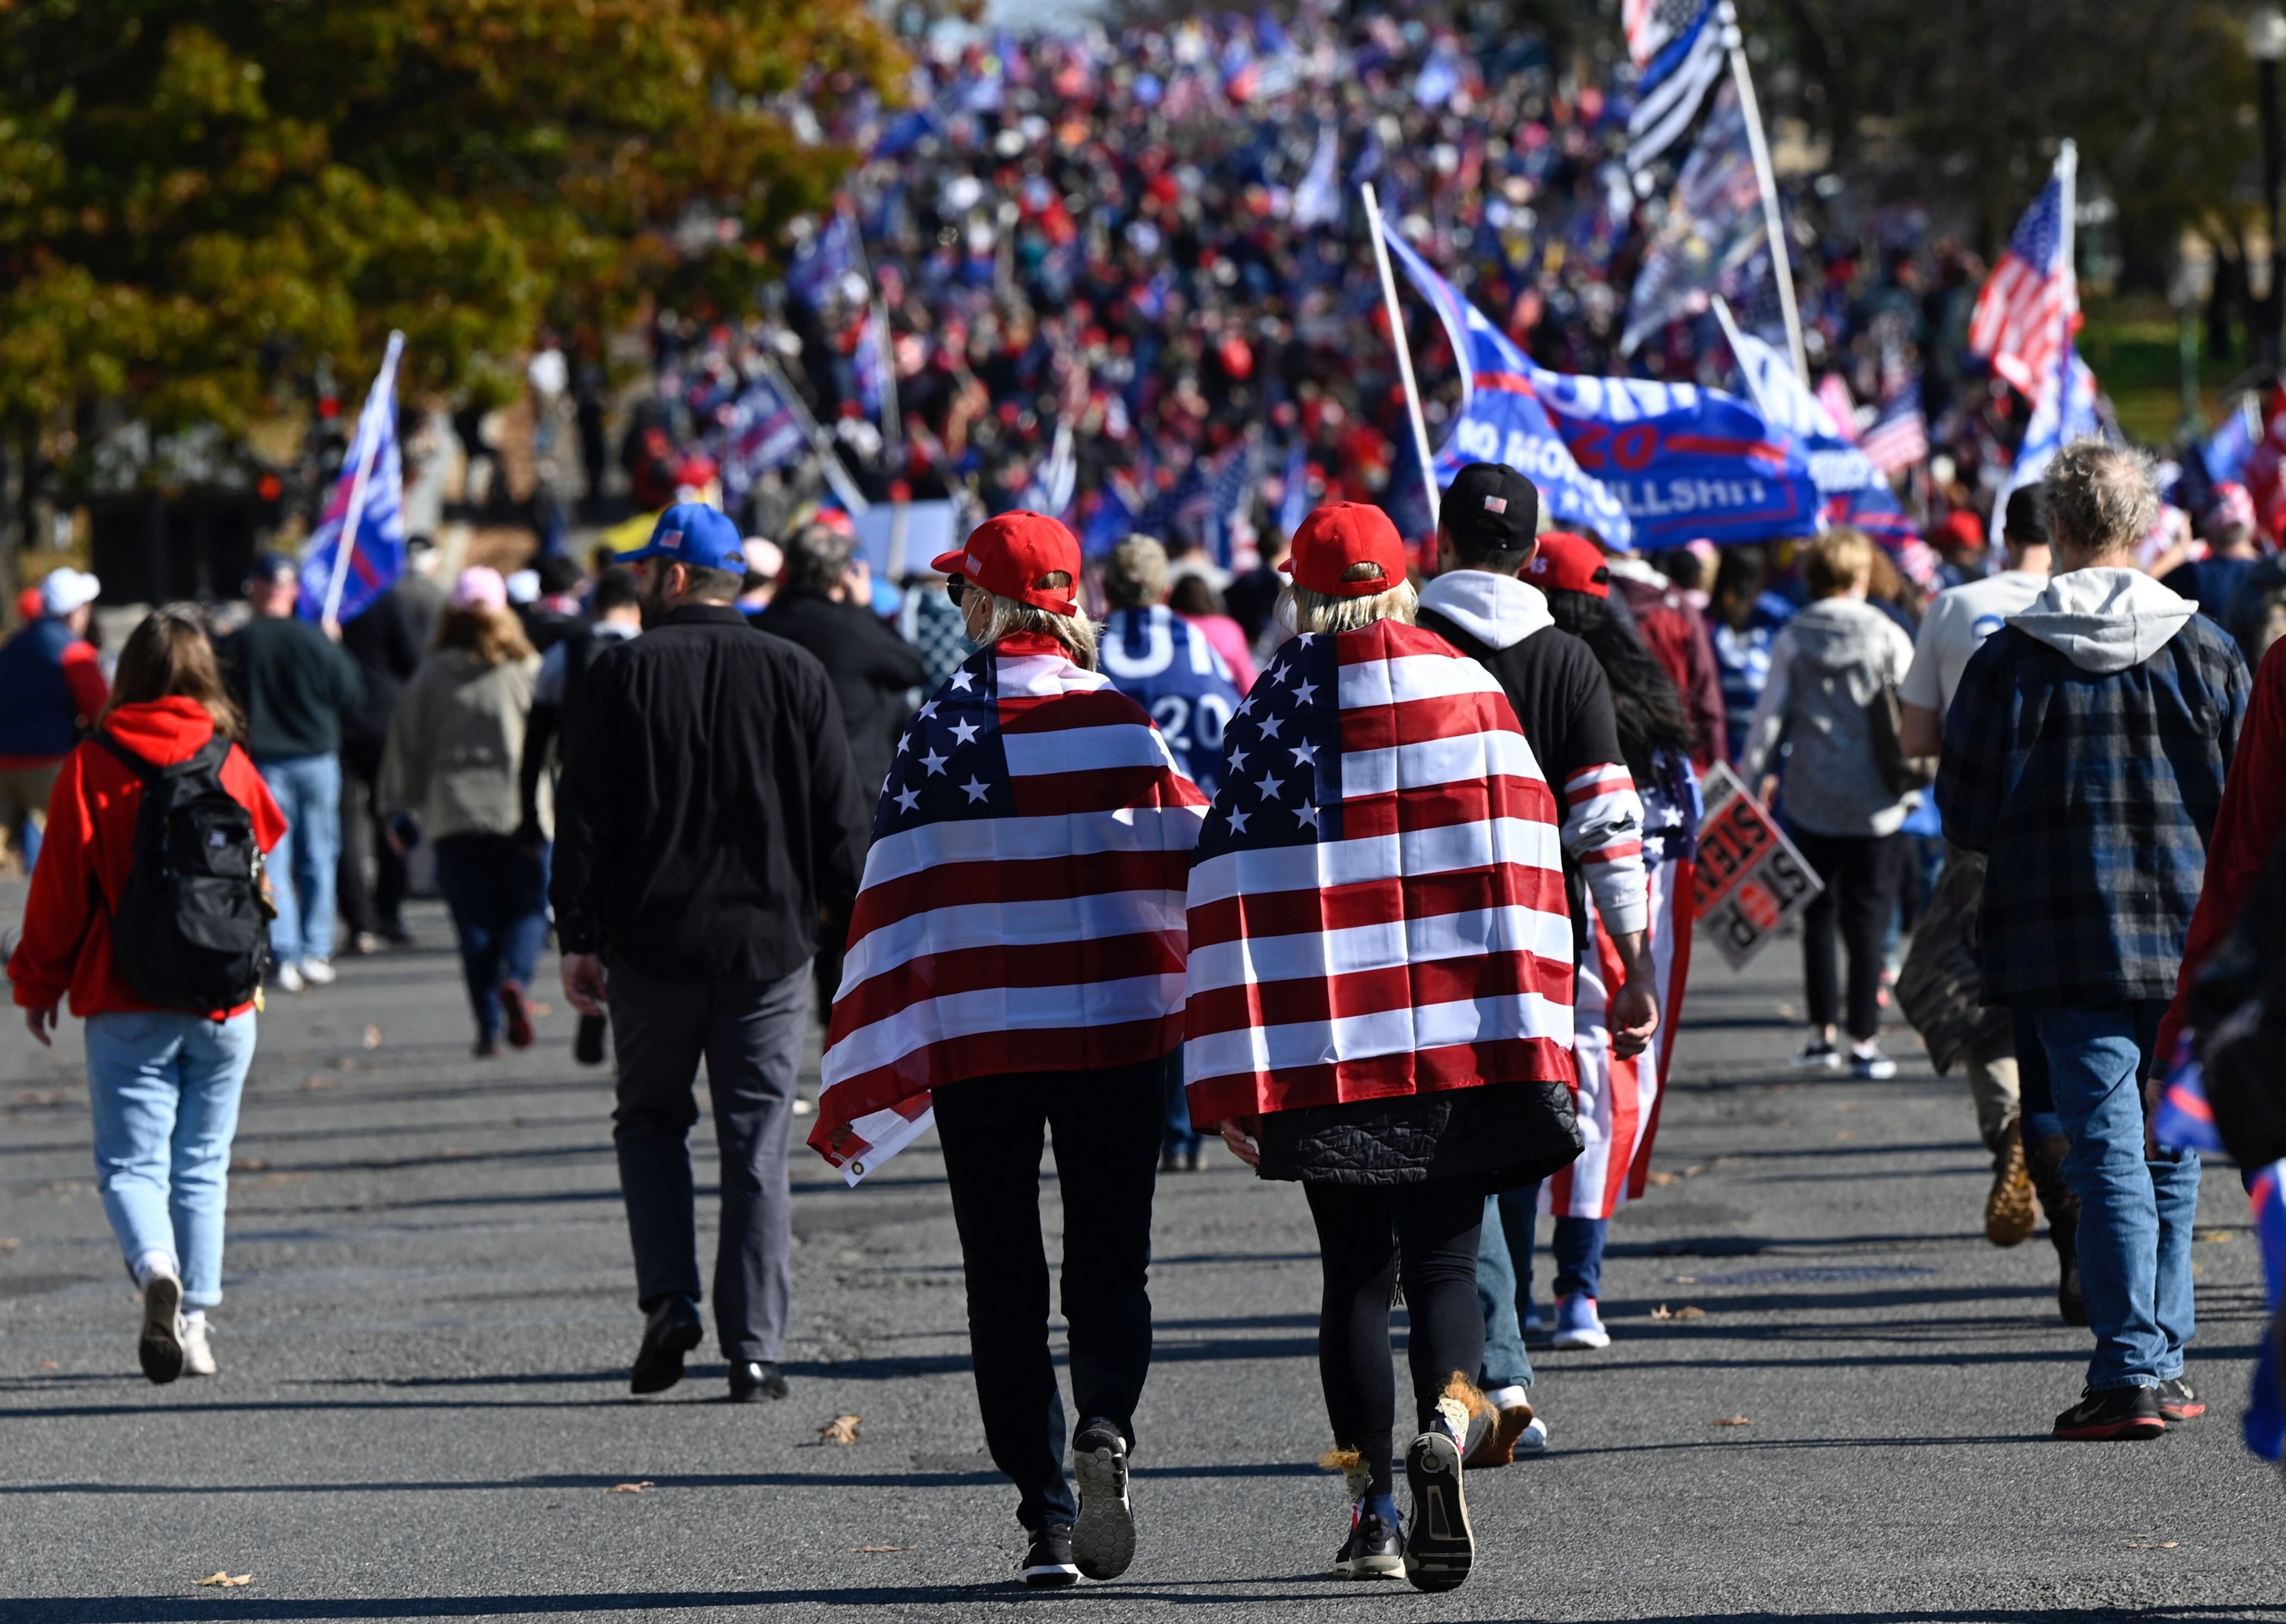 Trump supporters march in November 2020 to back the claim that the US election was fraudulent. Photo: AFP